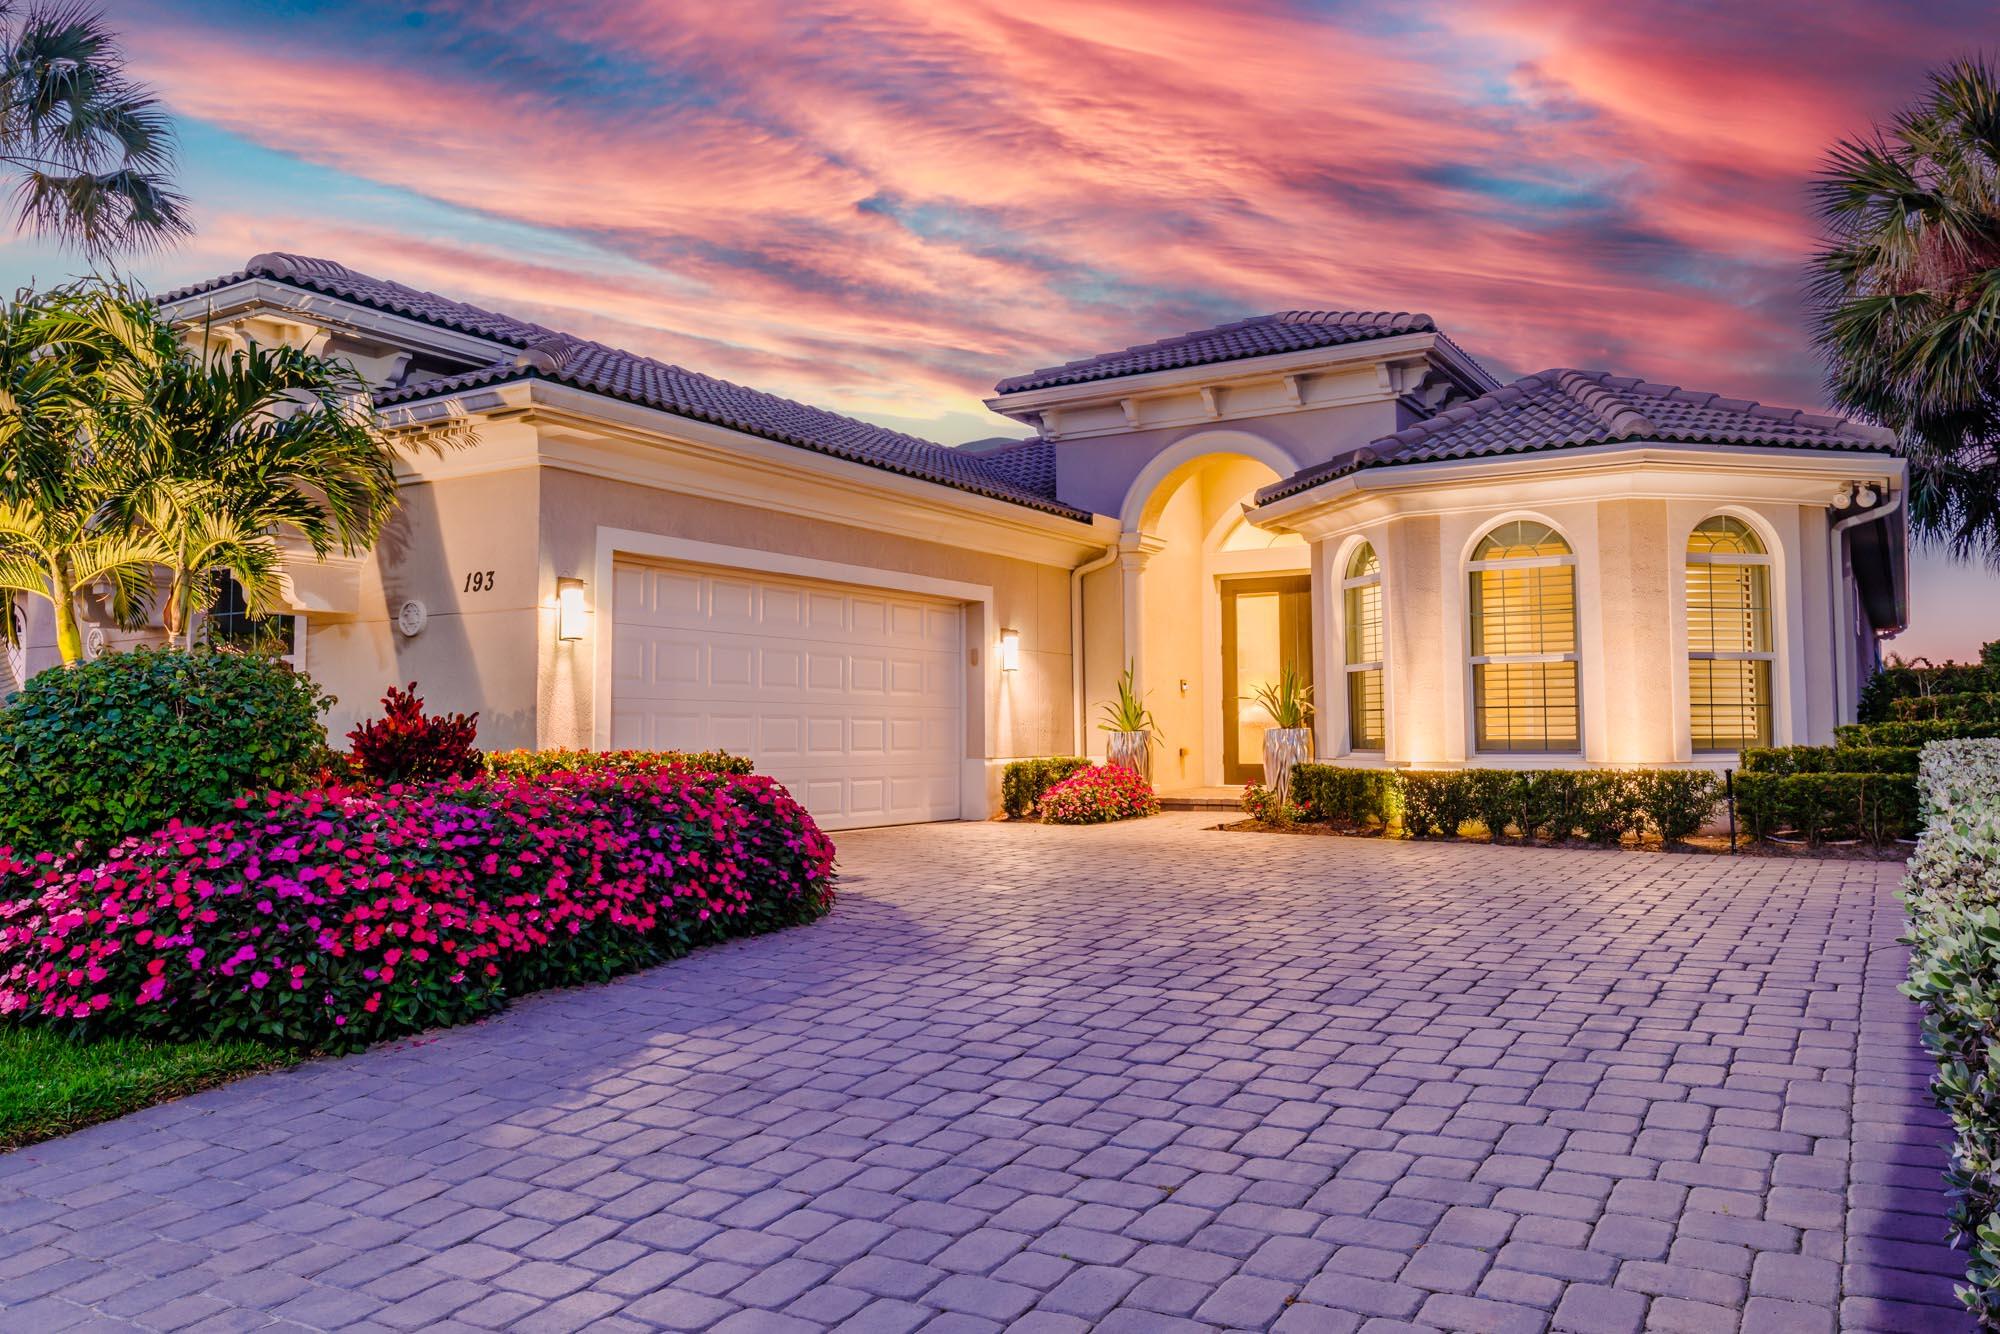 Live luxuriously & comfortably in this extended Salerno model with the most serene golf course & lake views in the resort-style gated community of Jupiter Country Club. **BONUS** Highly sought-after INTERMEDIATE golf membership is grandfathered and available for purchase to the buyer of this home. This membership level is now no longer available and there is currently a waitlist for golf memberships. (Buyer could also opt for social/club membership). This one-story open floor plan boasts 3 bedrooms, 2 1/2 baths, an office/den and a 2 car garage. The extended Salerno model offers a larger covered patio area and an expanded primary suite. Upgraded with Control4 smart home automation throughout for window shades, speakers, AC, TVs and more. Immerse yourself in the ultimate outdoor oasis with screen-enclosure, a large saltwater pool &amp; spa with sun shelf, and a built-in summer kitchen perfect for entertaining. This home is luxuriously appointed and provides all the essentials of easy Florida living with impact glass windows, CBS construction, solid core doors, and natural gas. The great room is adorned with a sleek custom built media wall with a linear electric fireplace, a stunning addition to the home crafted by local Schrapper's Fine Cabinetry. The kitchen features upgraded cabinetry, granite countertops, a wine refrigerator, a gas cooktop, and a custom vent hood. The primary suite is truly a retreat, featuring two walk-in closets with built-ins and a spa-like primary bath with dual vanities, a makeup area, walk-in shower with frameless glass enclosure, and a large soaking tub. Jupiter Country Club is a luxury gated community conveniently located within close proximity of I-95 and the FL Turnpike, beaches, shopping, restaurants, parks &amp; nature preserves. Club amenities include a Greg Norman designed golf course, 2 resort-style pools, the newly remodeled Sway restaurant, a state-of-the-art fitness center plus yoga/mat pilates/barre classes, tennis, bocce ball, pickle ball &amp; basketball. Live your best life here!